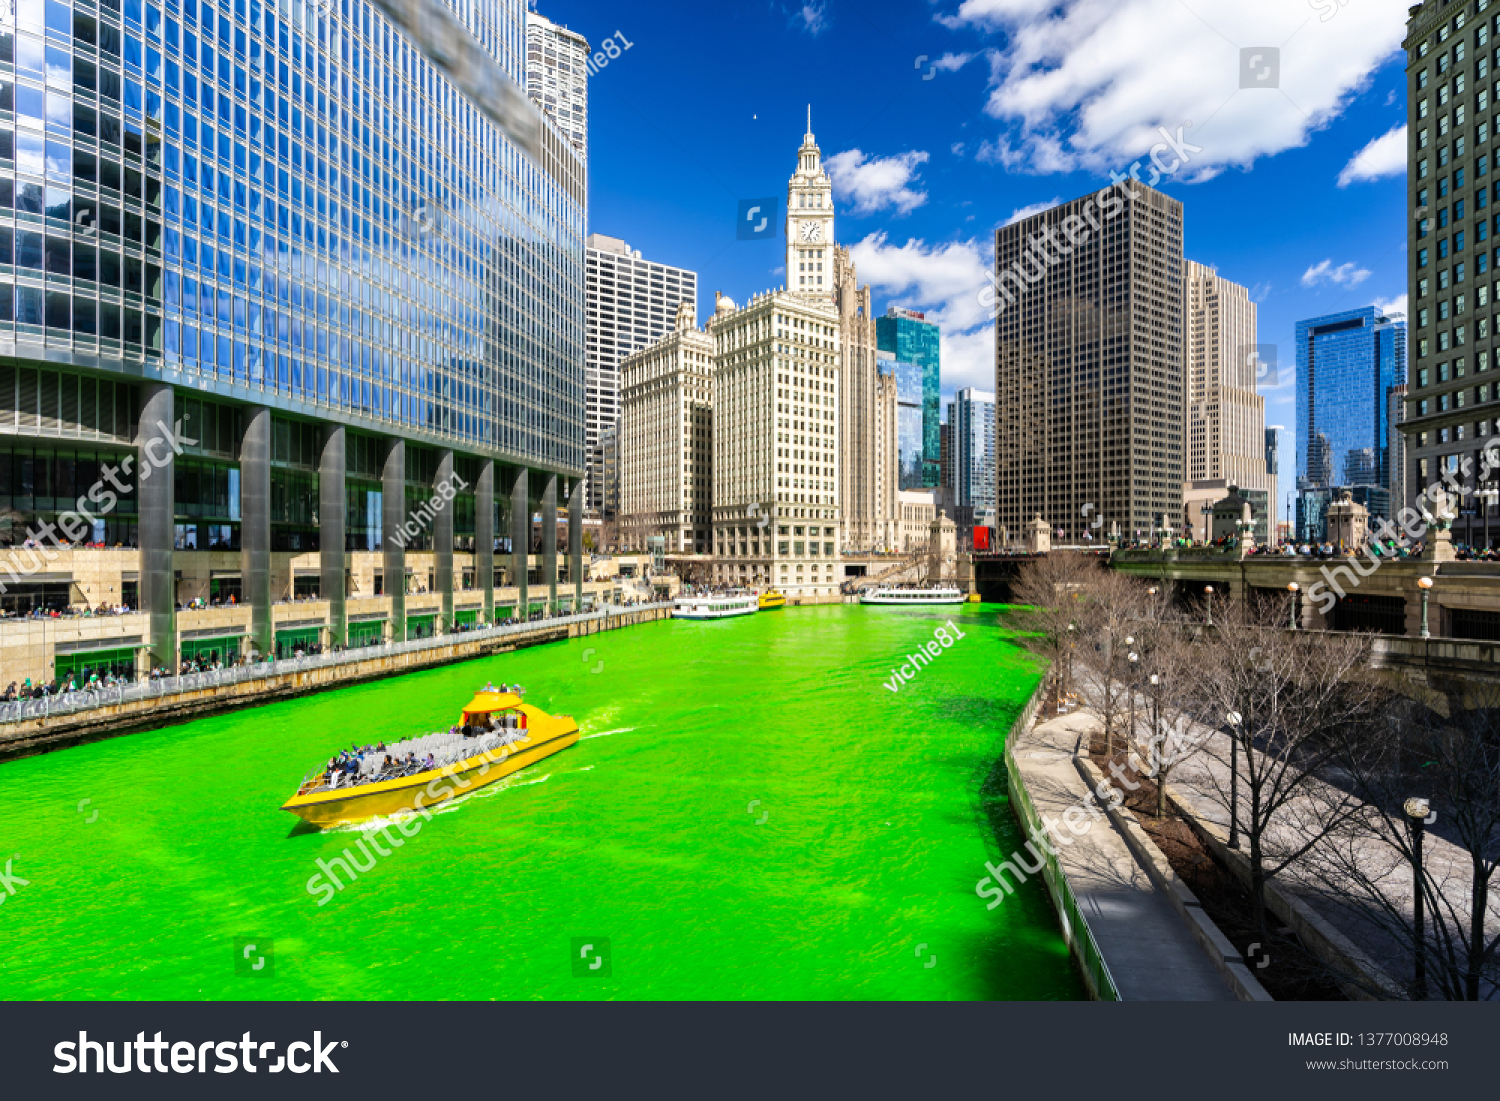 Chicago Skylines building along green dyeing river of Chicago River on St. Patrick's day festival in Chicago Downtown IL USA #1377008948